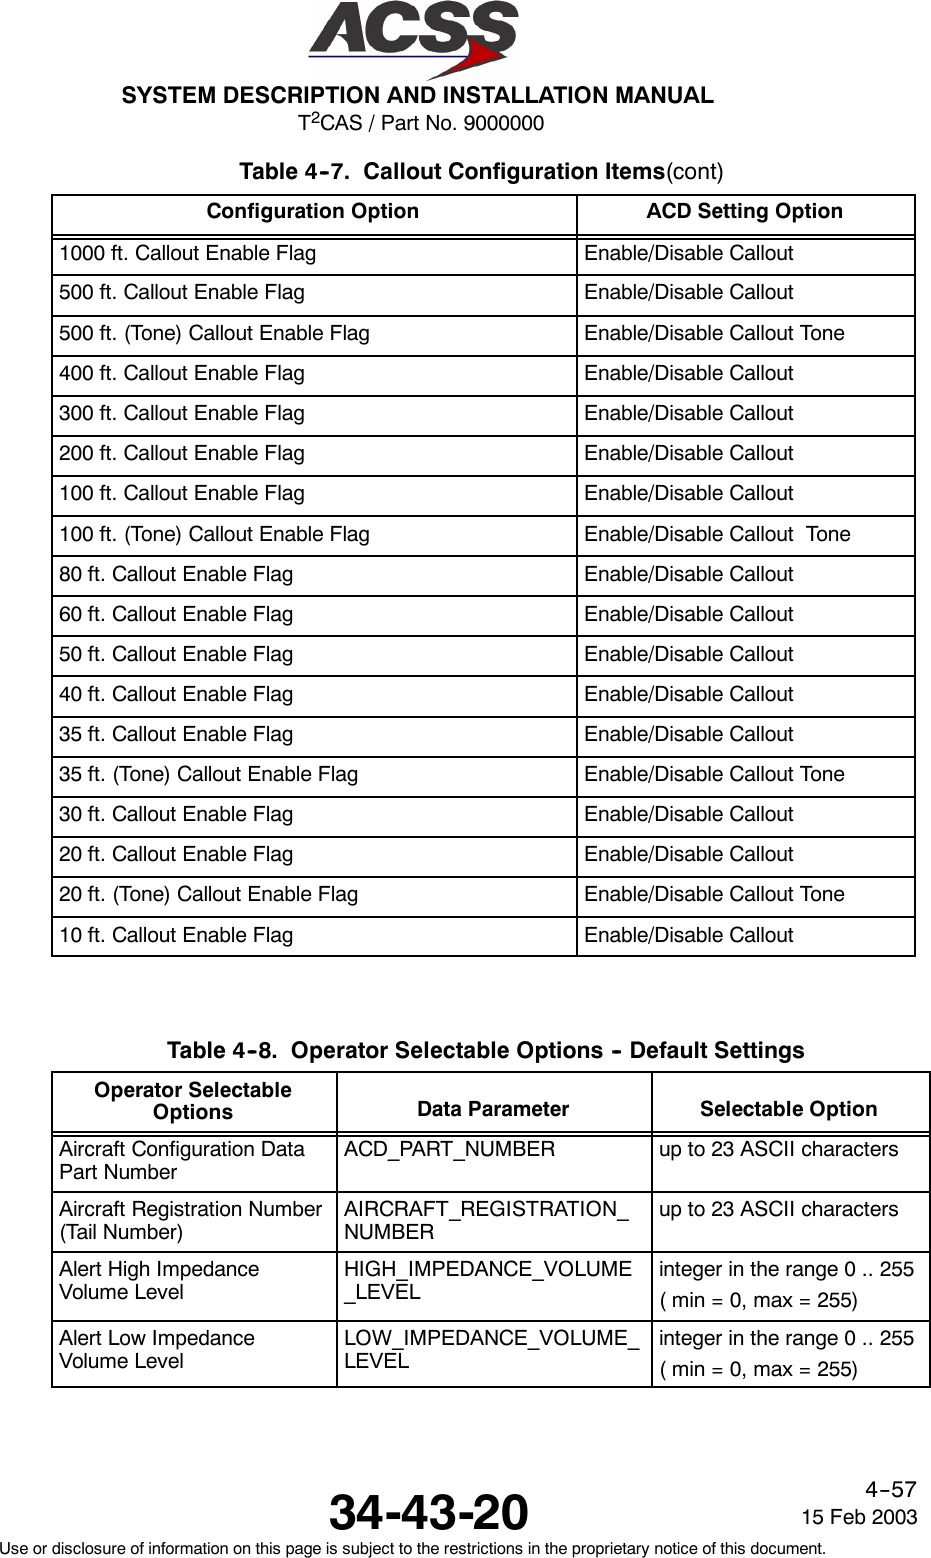 T2CAS / Part No. 9000000SYSTEM DESCRIPTION AND INSTALLATION MANUAL34-43-20 15 Feb 2003Use or disclosure of information on this page is subject to the restrictions in the proprietary notice of this document.4--57Table 4--7. Callout Configuration Items(cont)Configuration Option ACD Setting Option1000 ft. Callout Enable Flag Enable/Disable Callout500 ft. Callout Enable Flag Enable/Disable Callout500 ft. (Tone) Callout Enable Flag Enable/Disable Callout Tone400 ft. Callout Enable Flag Enable/Disable Callout300 ft. Callout Enable Flag Enable/Disable Callout200 ft. Callout Enable Flag Enable/Disable Callout100 ft. Callout Enable Flag Enable/Disable Callout100 ft. (Tone) Callout Enable Flag Enable/Disable Callout Tone80 ft. Callout Enable Flag Enable/Disable Callout60 ft. Callout Enable Flag Enable/Disable Callout50 ft. Callout Enable Flag Enable/Disable Callout40 ft. Callout Enable Flag Enable/Disable Callout35 ft. Callout Enable Flag Enable/Disable Callout35 ft. (Tone) Callout Enable Flag Enable/Disable Callout Tone30 ft. Callout Enable Flag Enable/Disable Callout20 ft. Callout Enable Flag Enable/Disable Callout20 ft. (Tone) Callout Enable Flag Enable/Disable Callout Tone10 ft. Callout Enable Flag Enable/Disable CalloutTable 4--8. Operator Selectable Options -- Default SettingsOperator SelectableOptions Data Parameter Selectable OptionAircraft Configuration DataPart NumberACD_PART_NUMBER up to 23 ASCII charactersAircraft Registration Number(Tail Number)AIRCRAFT_REGISTRATION_NUMBERup to 23 ASCII charactersAlert High ImpedanceVolume LevelHIGH_IMPEDANCE_VOLUME_LEVELinteger in the range 0 .. 255( min = 0, max = 255)Alert Low ImpedanceVolume LevelLOW_IMPEDANCE_VOLUME_LEVELinteger in the range 0 .. 255( min = 0, max = 255)